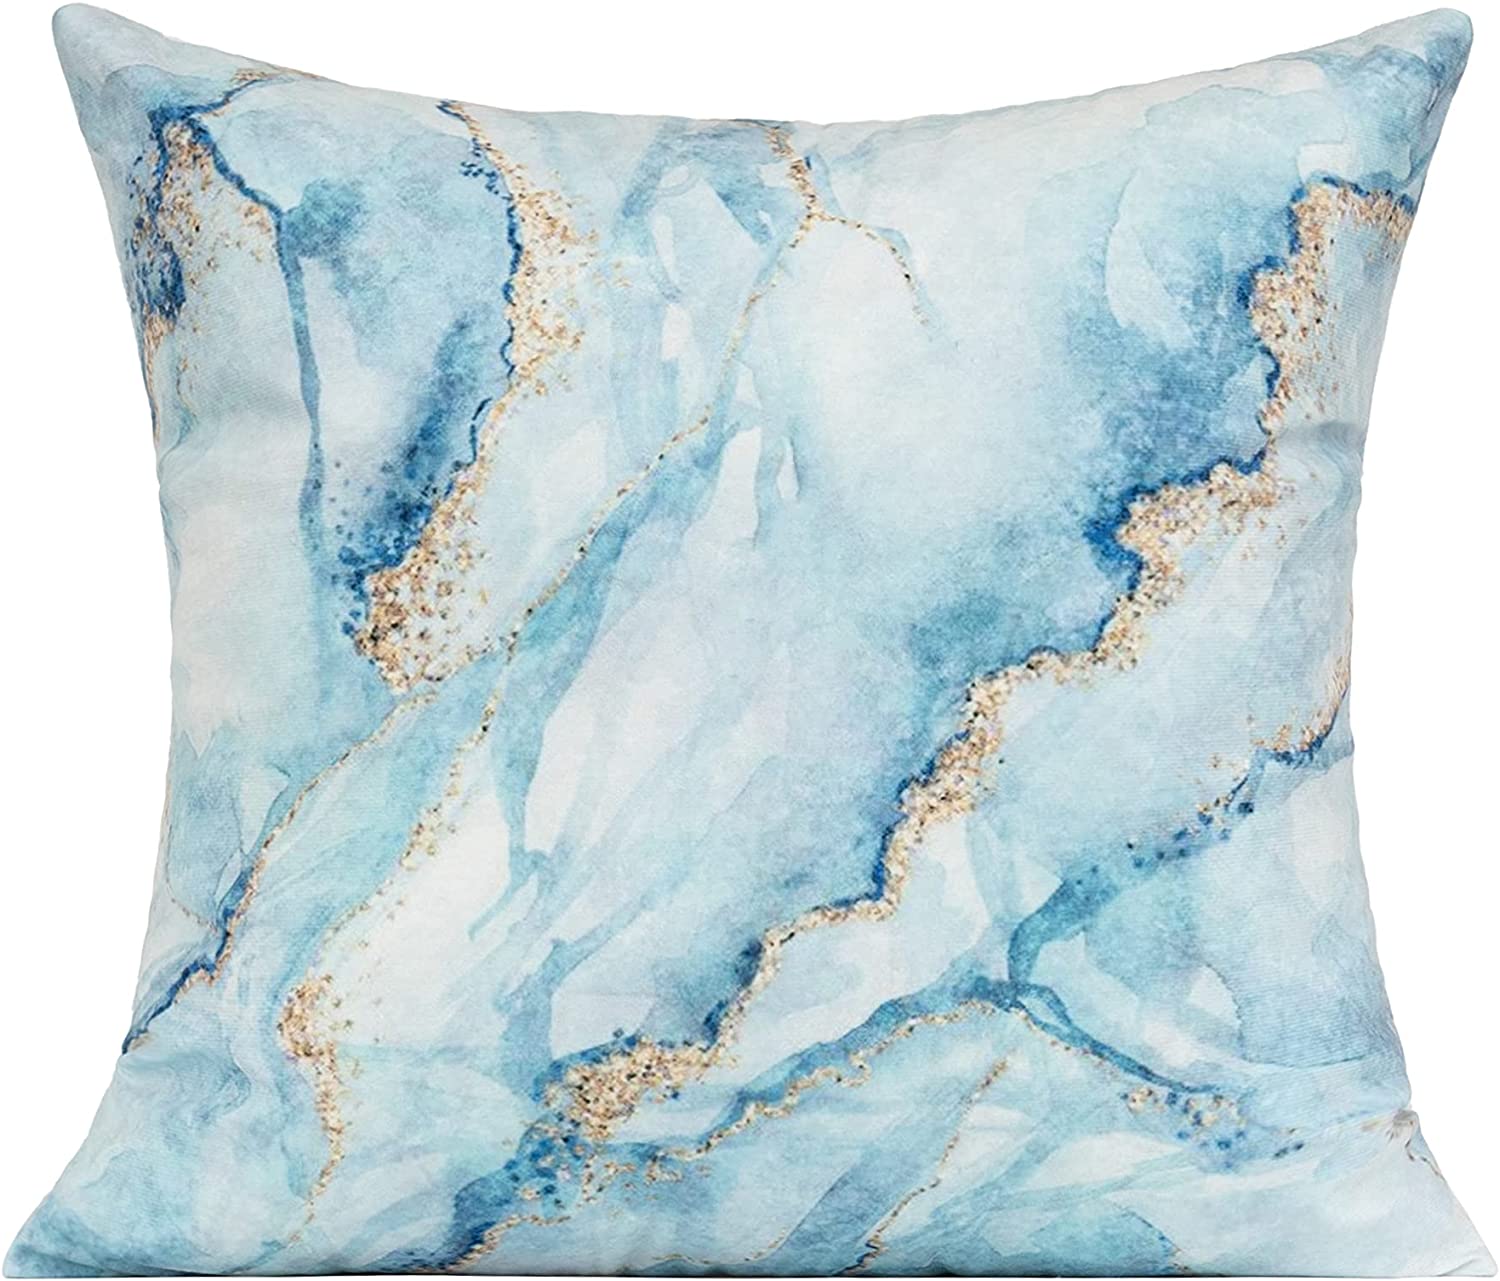 VAKADO Navy Blue Outdoor Throw Pillows Covers Gold Teal Decorative Turquoise Marble Abstract Spring Patio Furniture Bench Couch Cushion Covers 18X18 Set of 4 for Summer Sofa Chair